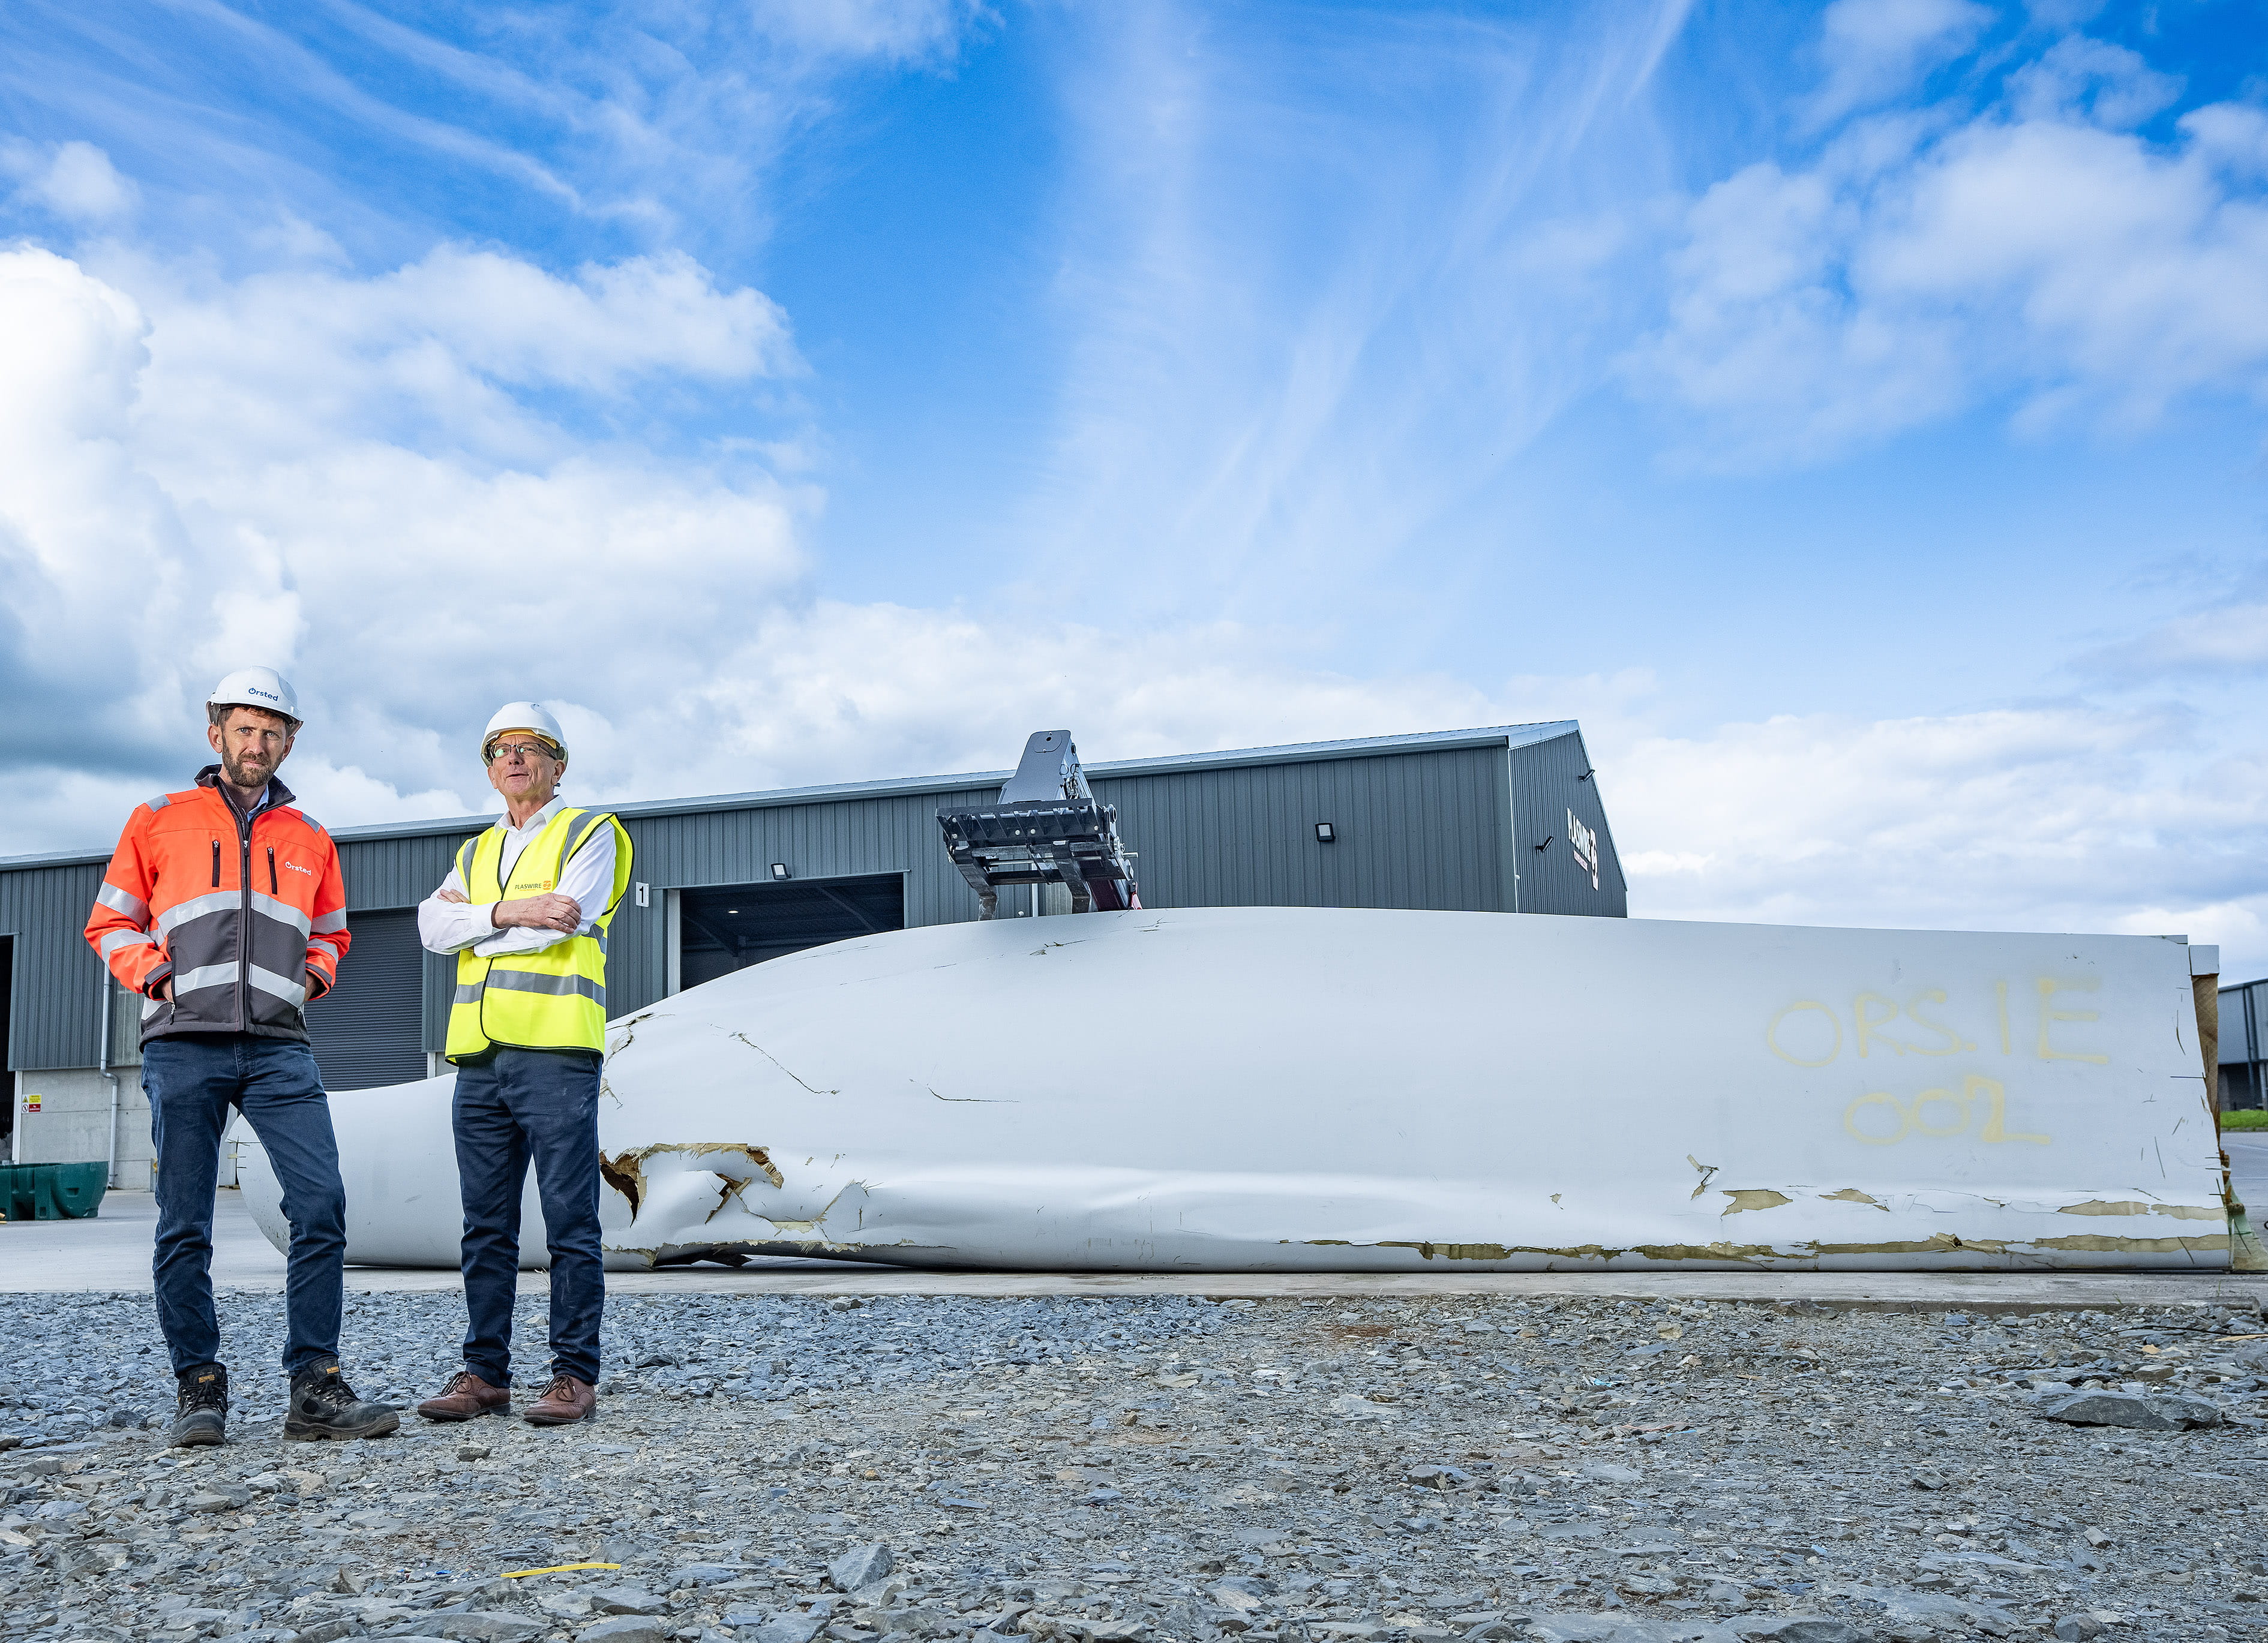 To men standing in front of a turbine blade ready to be recycled